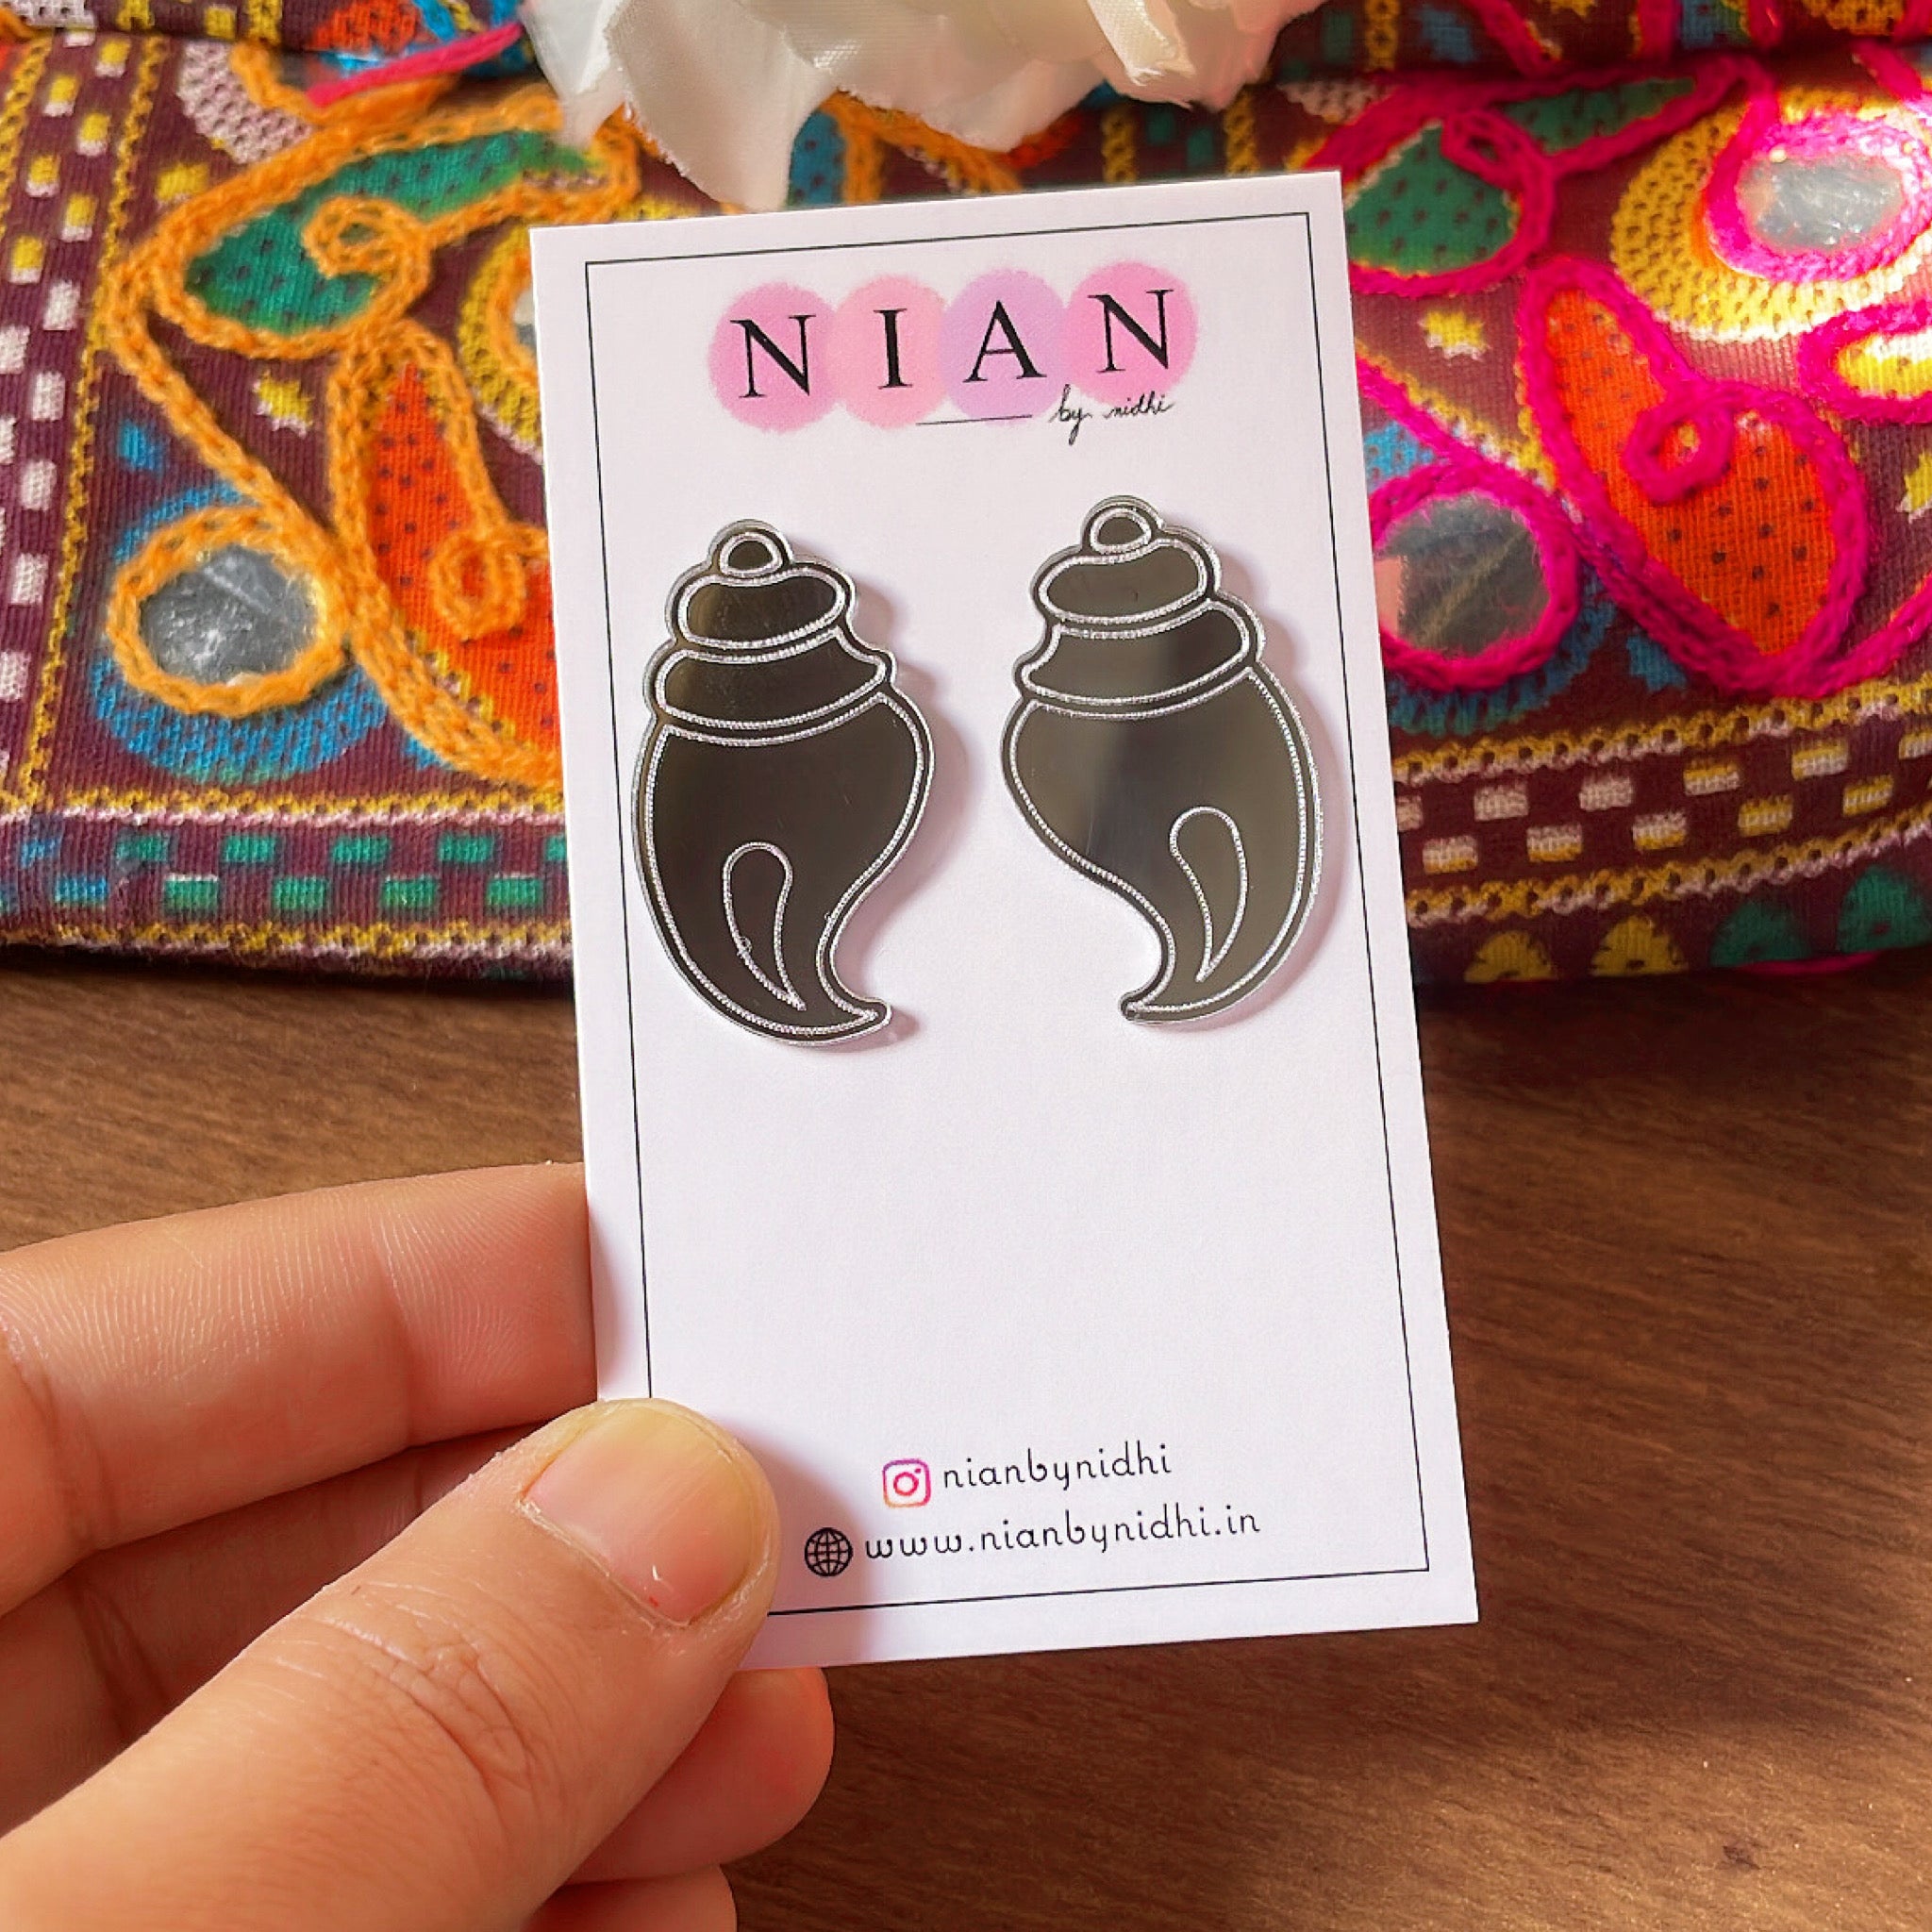 Shubh Shankh Earrings - Nian by Nidhi - Glassy Silver - placed in a brown colorful background, held in a hand